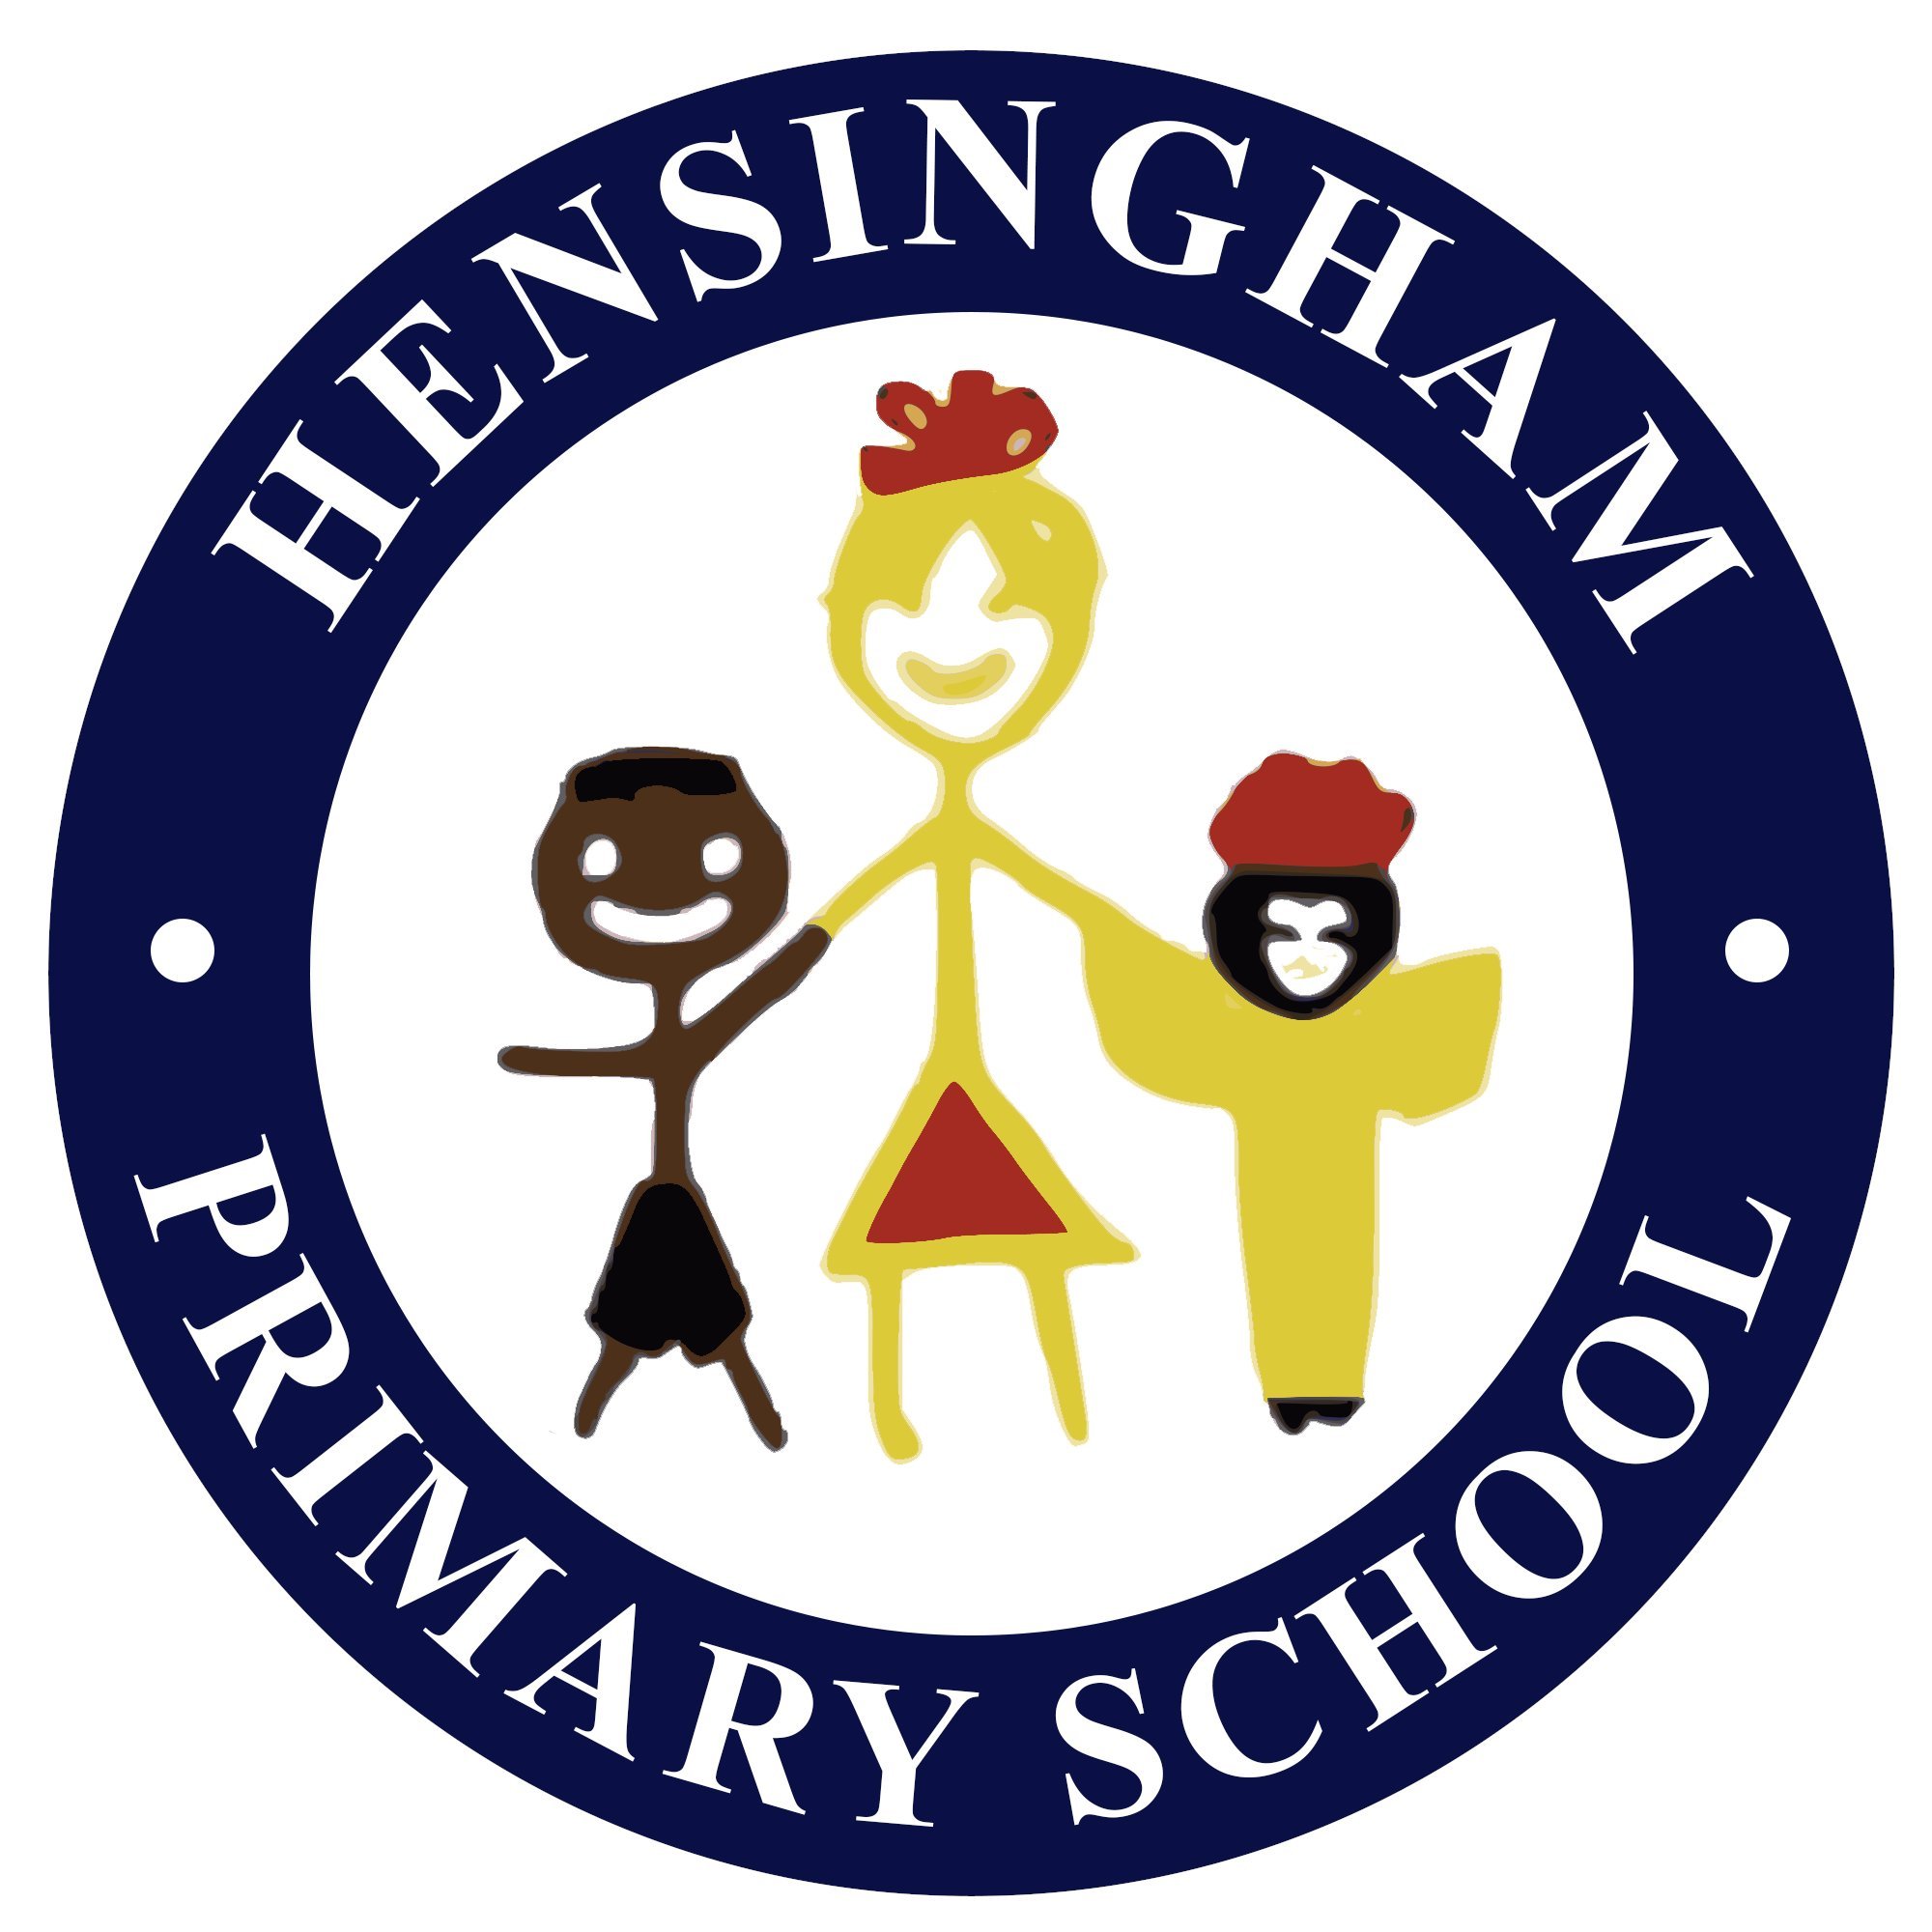 Official Twitter for Hensingham Primary School. Part of the Cumbria Education Trust @CE_Trust - Be The Best You Can Be! - Respect | Responsibility | Resilience